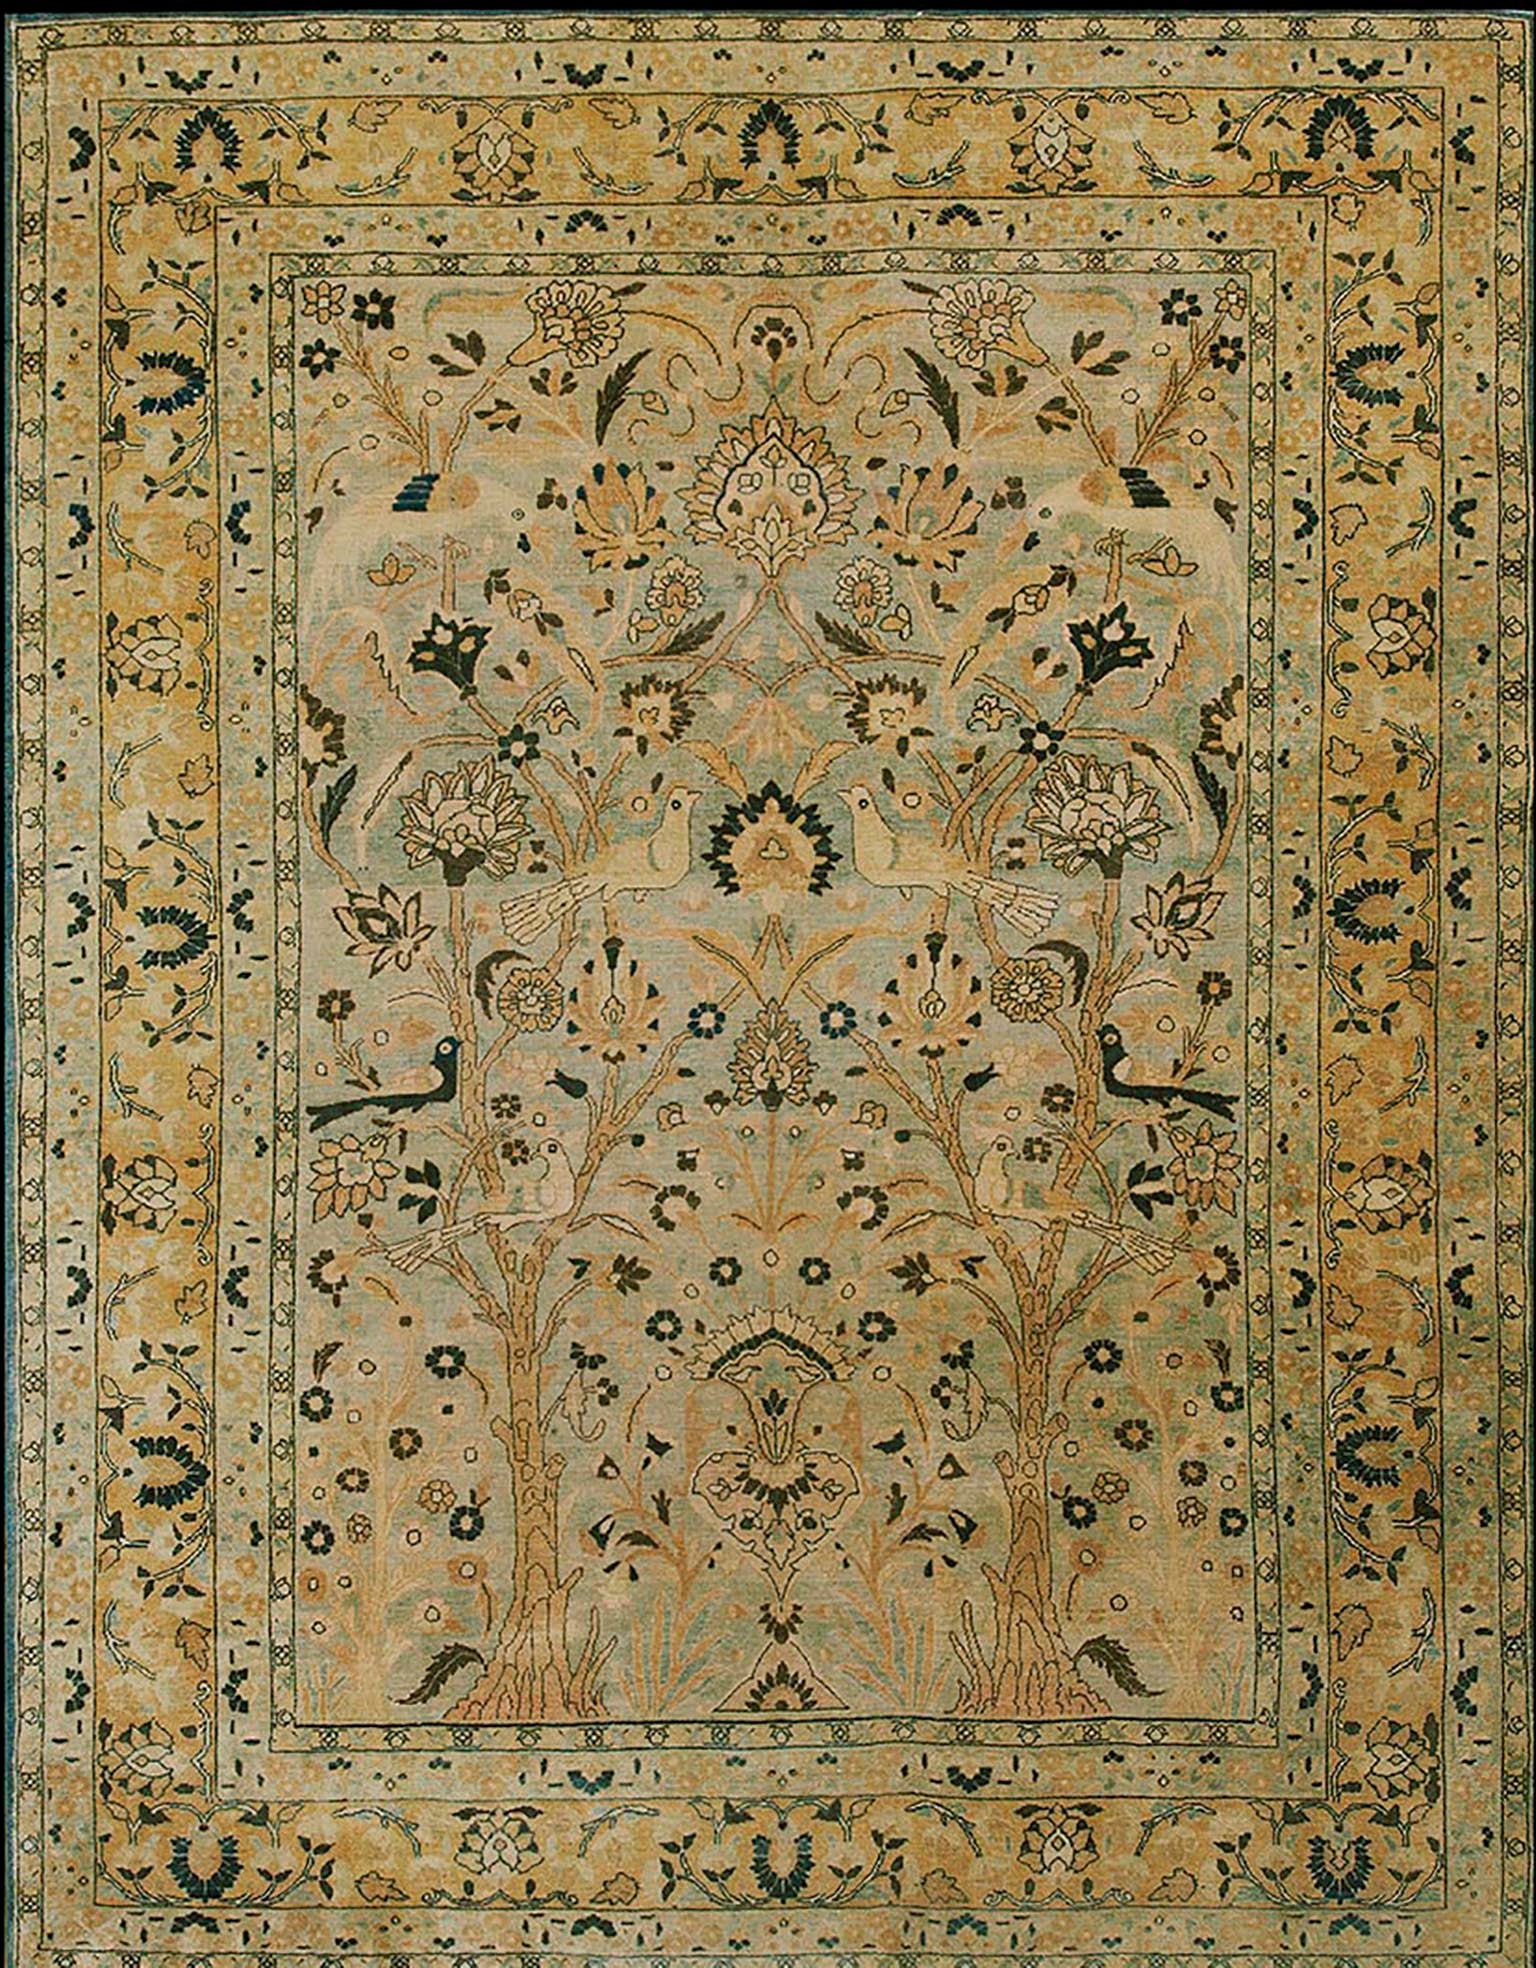 Early 20th Century N.E. Persian Khorassan Moud Carpet ( 9'3" x 12' - 282 x 366 ) For Sale